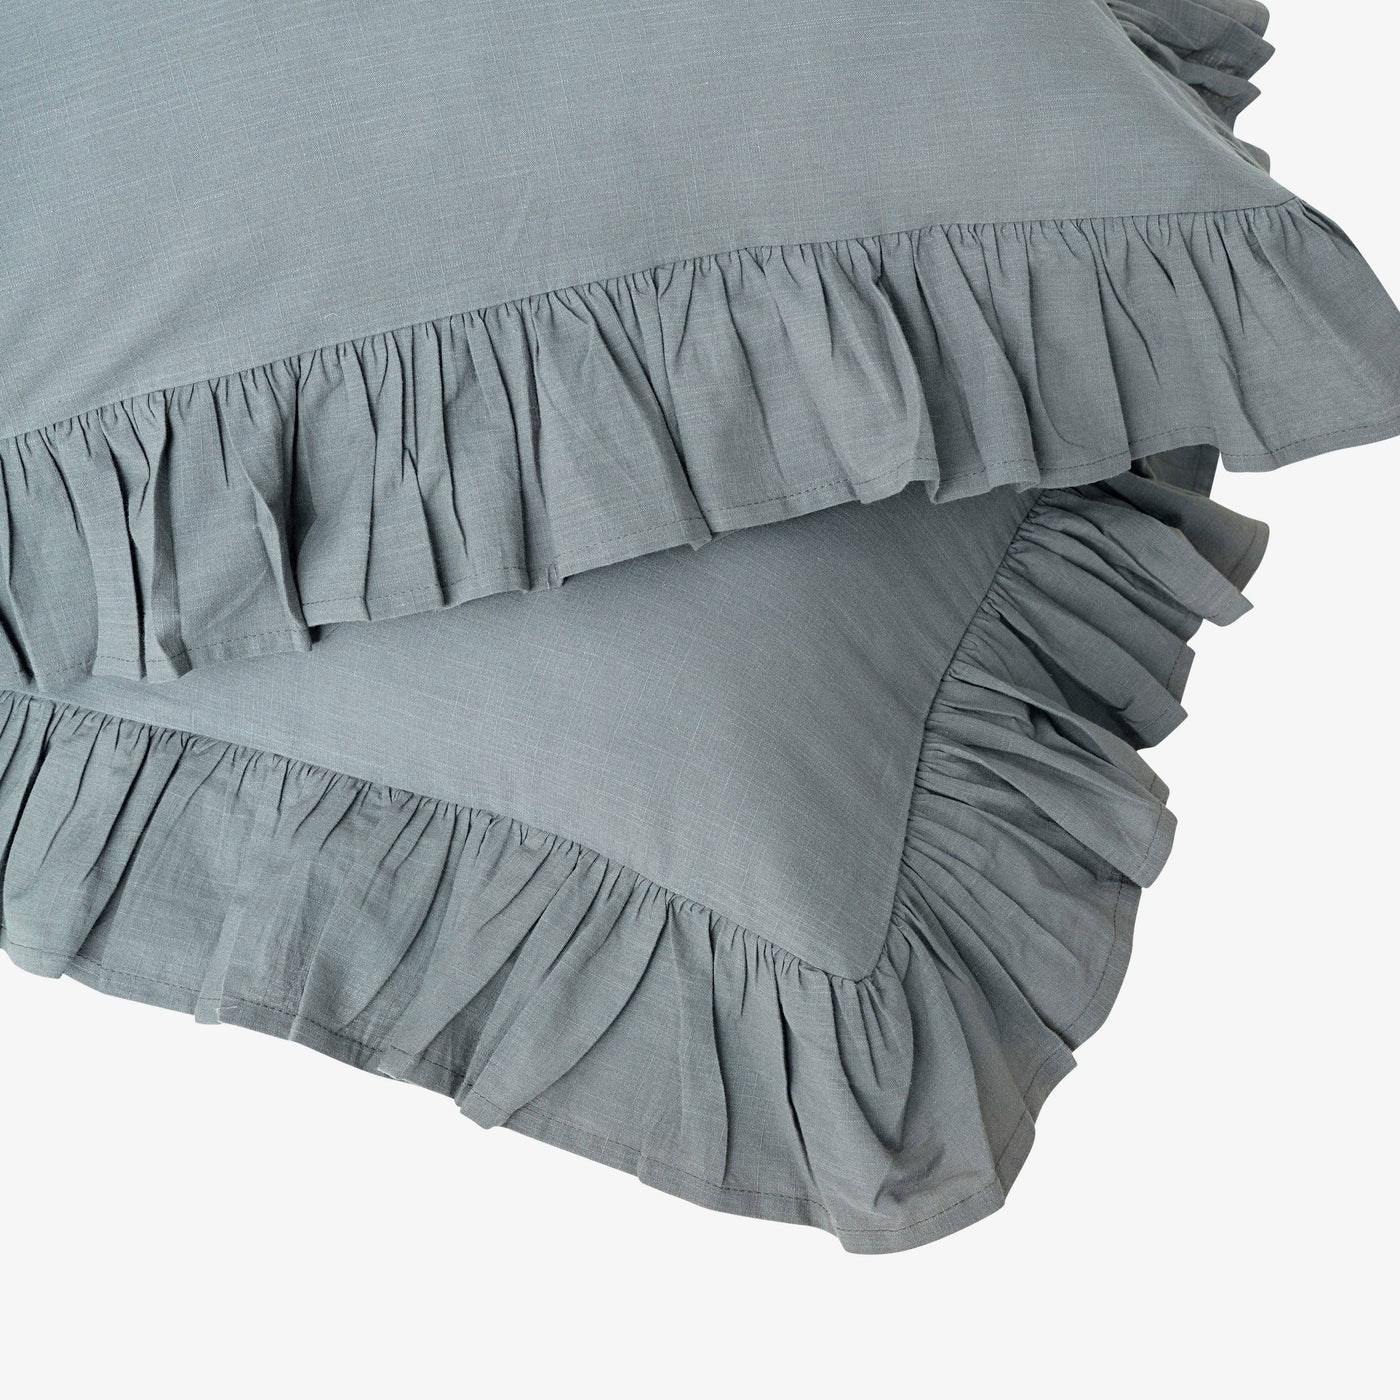 Ruby 100% Turkish Cotton Duvet Cover Set + Fitted Sheet, Anthracite Grey, Double Size Bedding Sets sazy.com